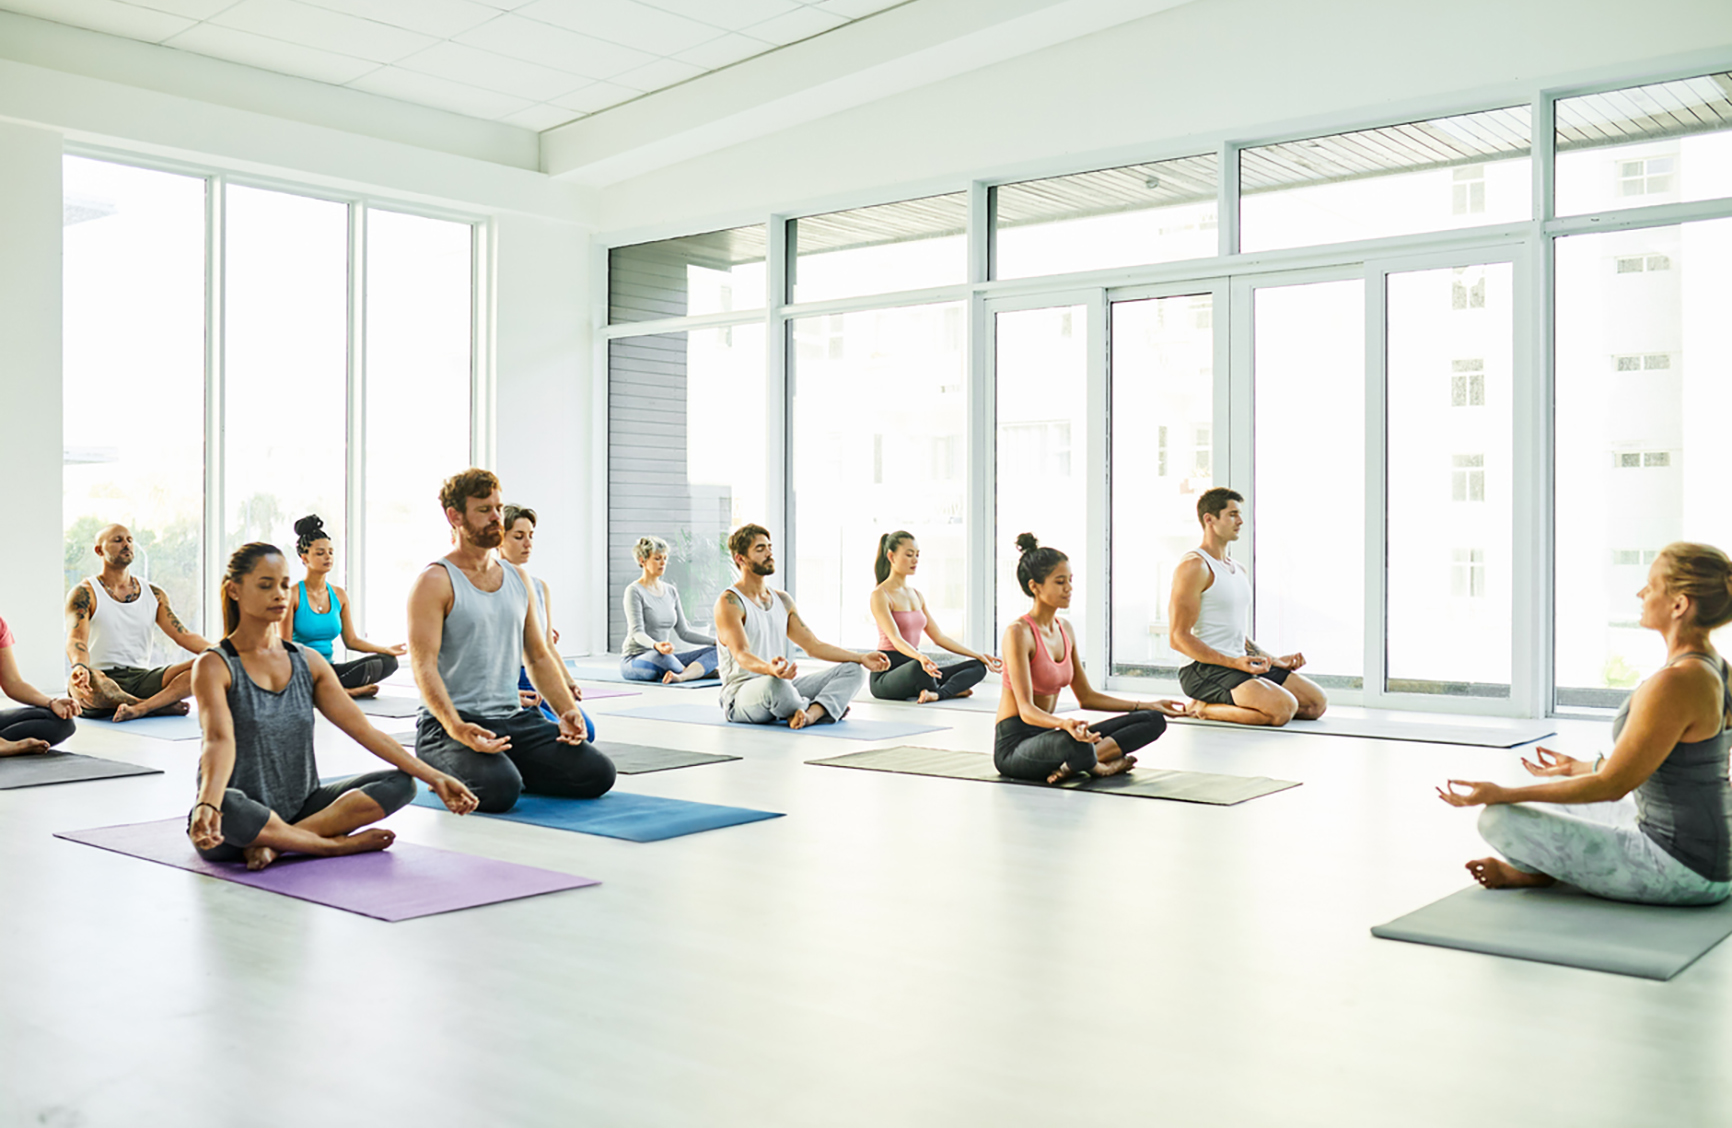 Shot of a group of men and women meditating in the lotus position during a yoga class